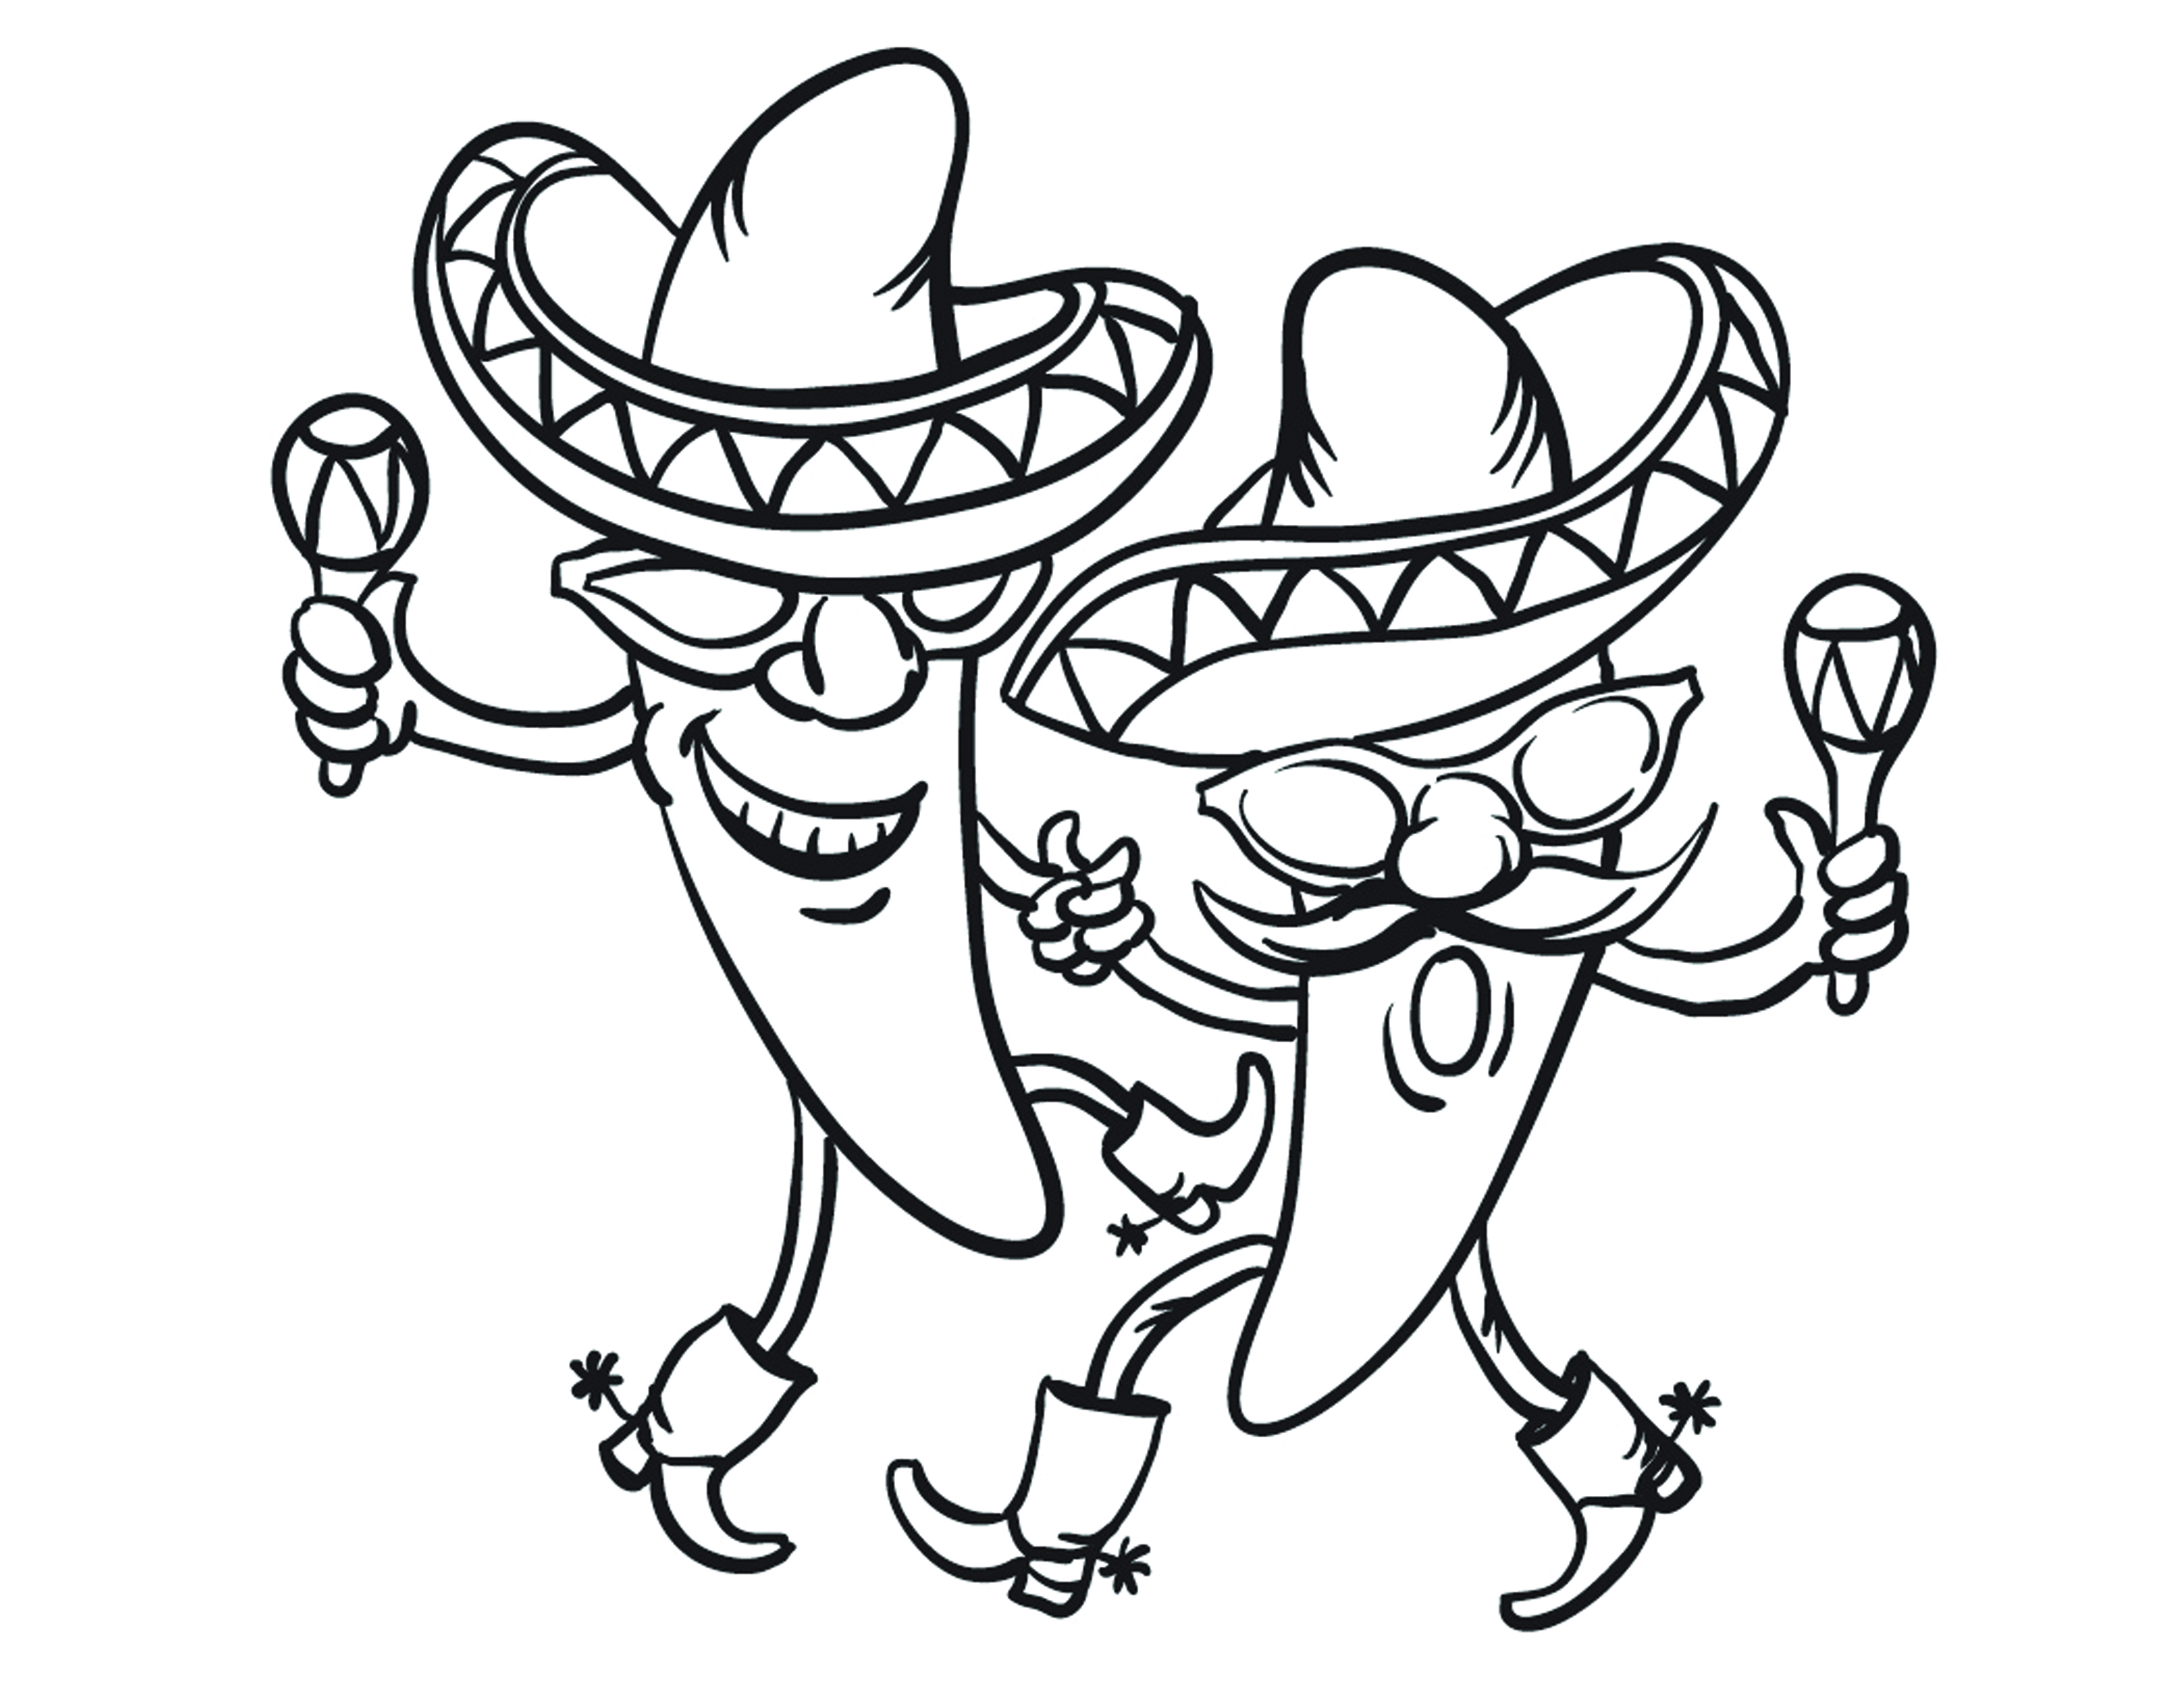 Download Restaurant Coloring Pages at GetDrawings.com | Free for ...